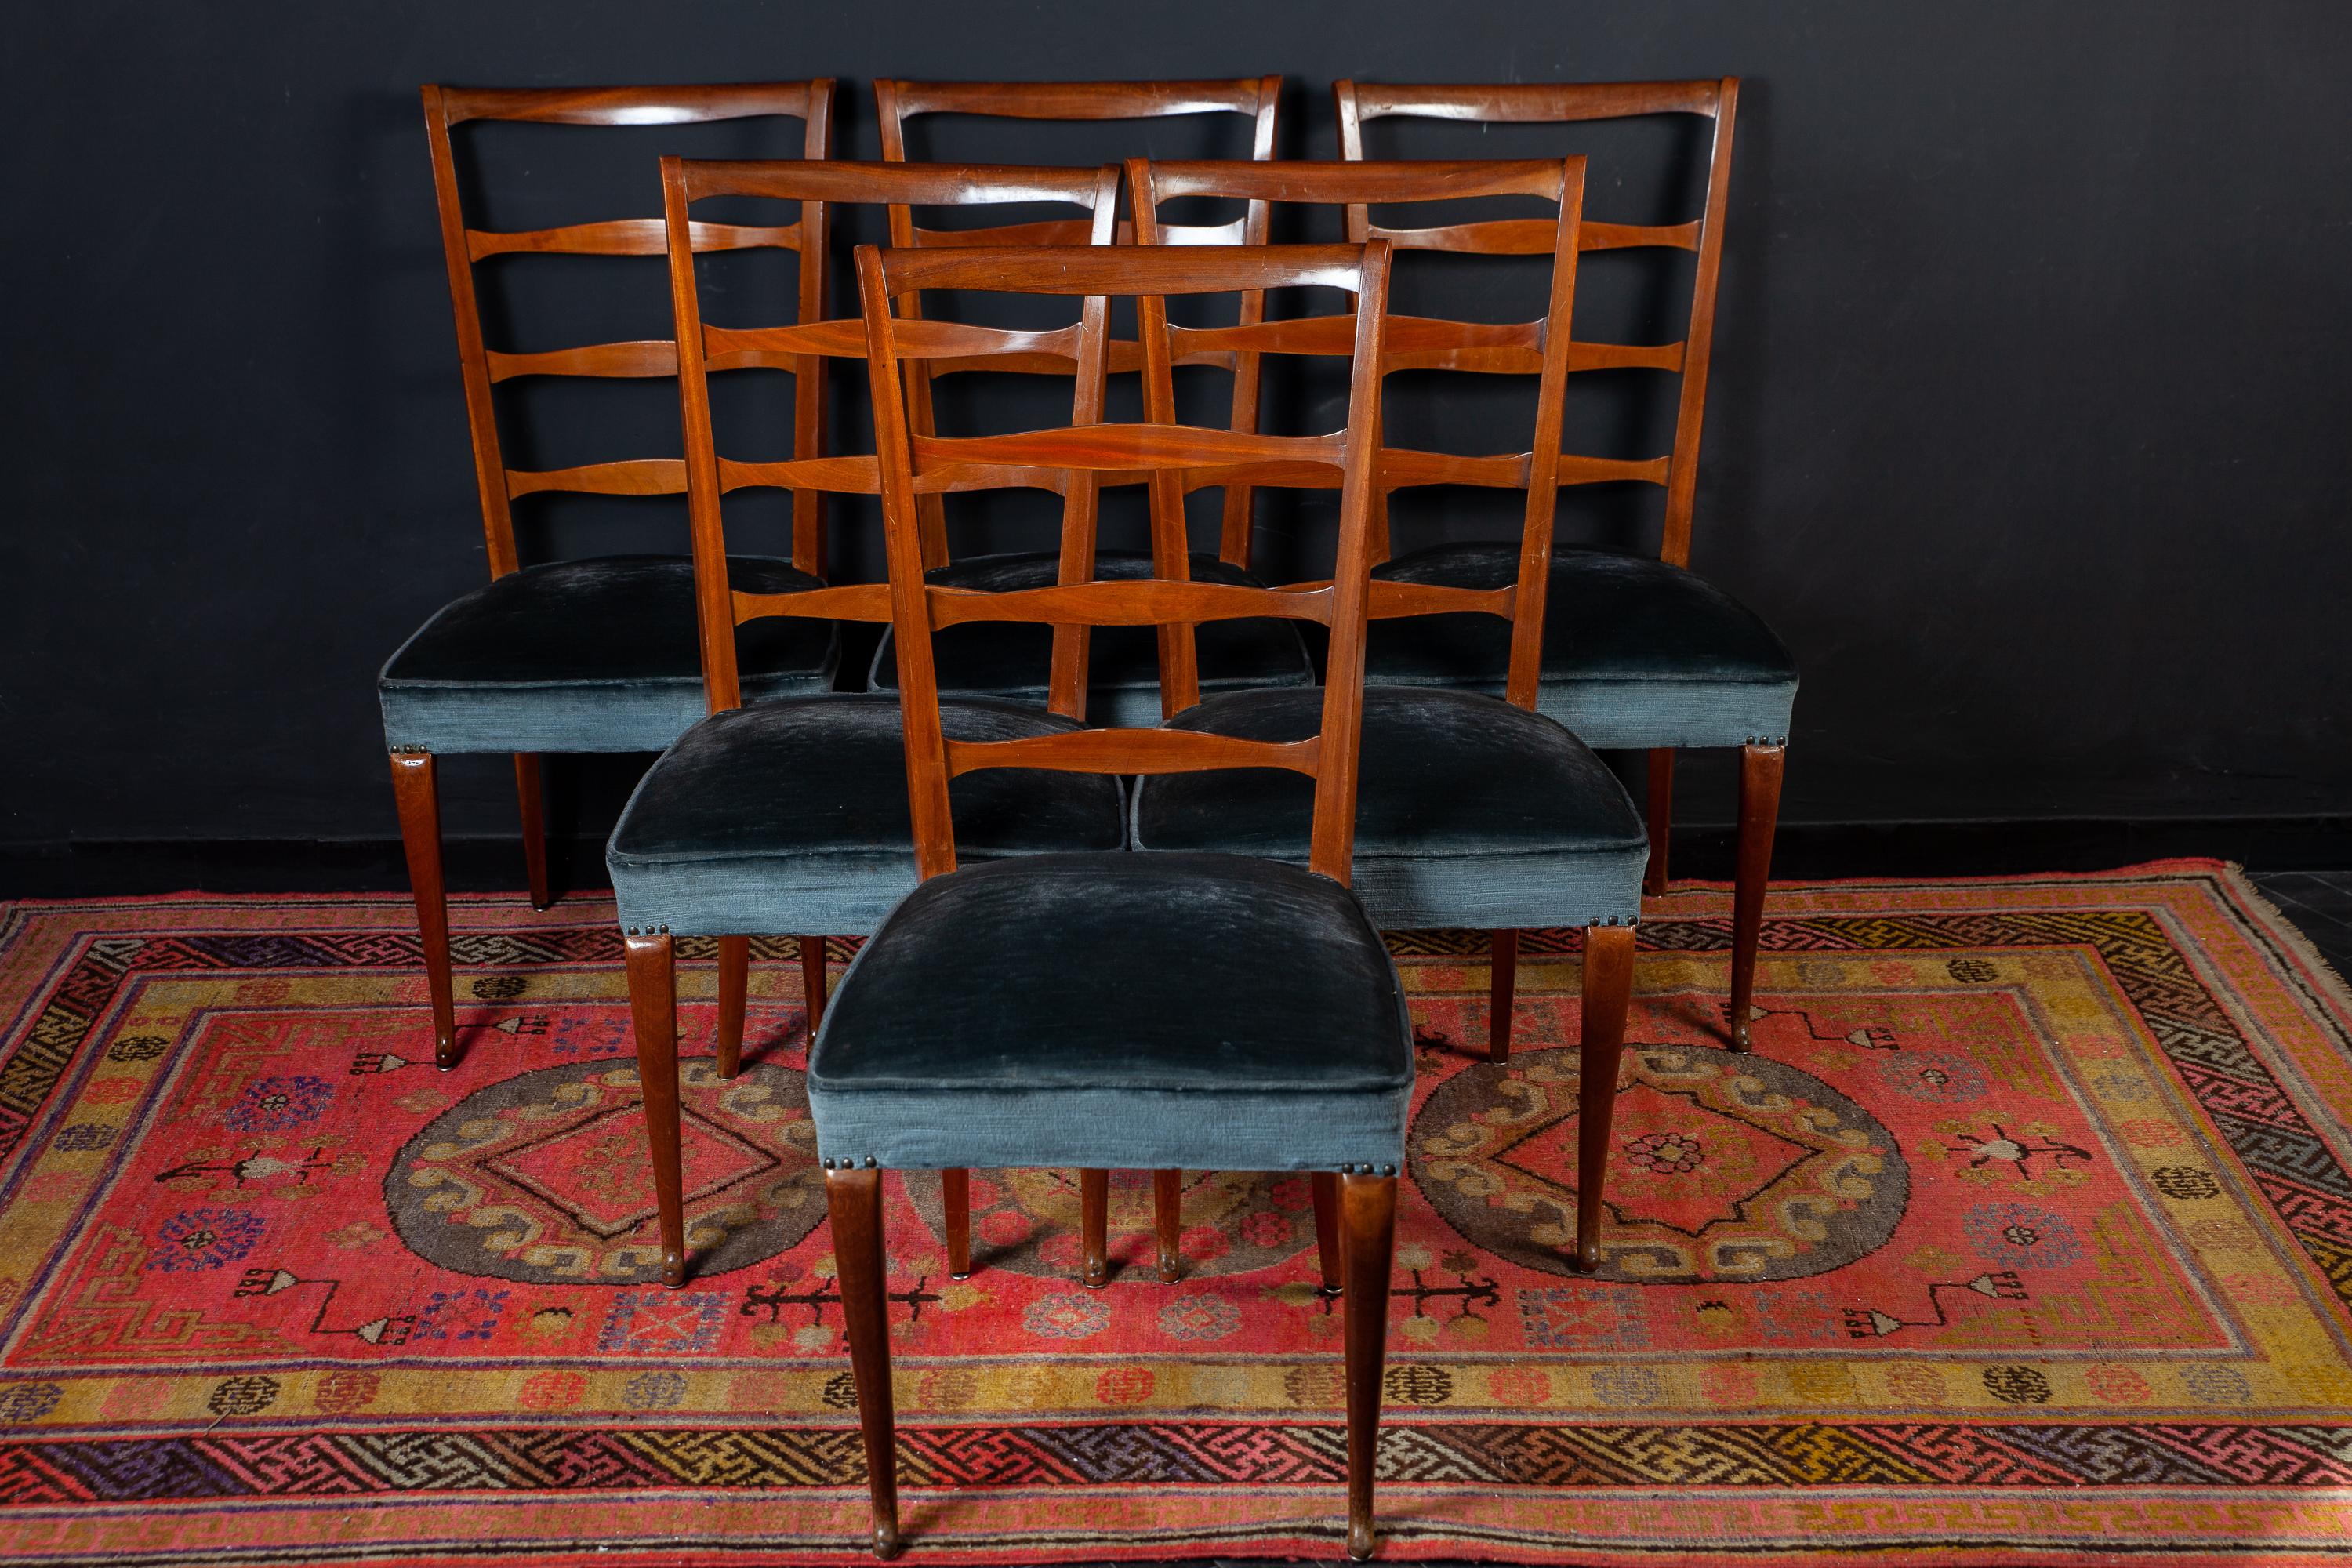 Paolo Buffa midcentury blue velvet and wood Italian dining chairs, 1950

A fine set of six Italian midcentury dining chairs with original blue velvet upholstery in a very good vintage condition.
Elegant design by Paolo Buffa, 1950.